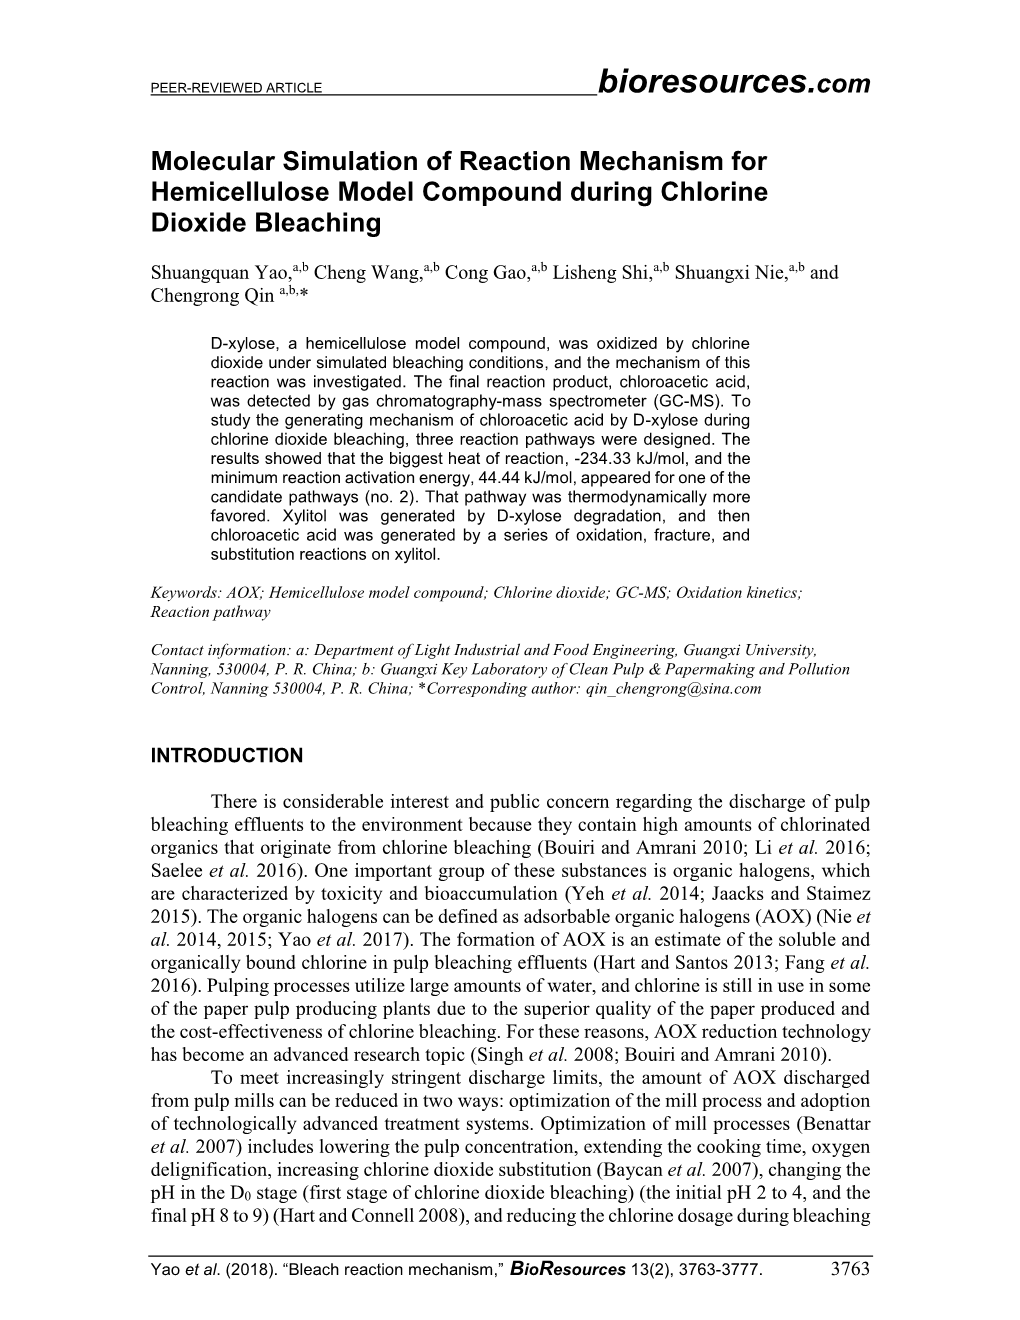 Molecular Simulation of Reaction Mechanism for Hemicellulose Model Compound During Chlorine Dioxide Bleaching